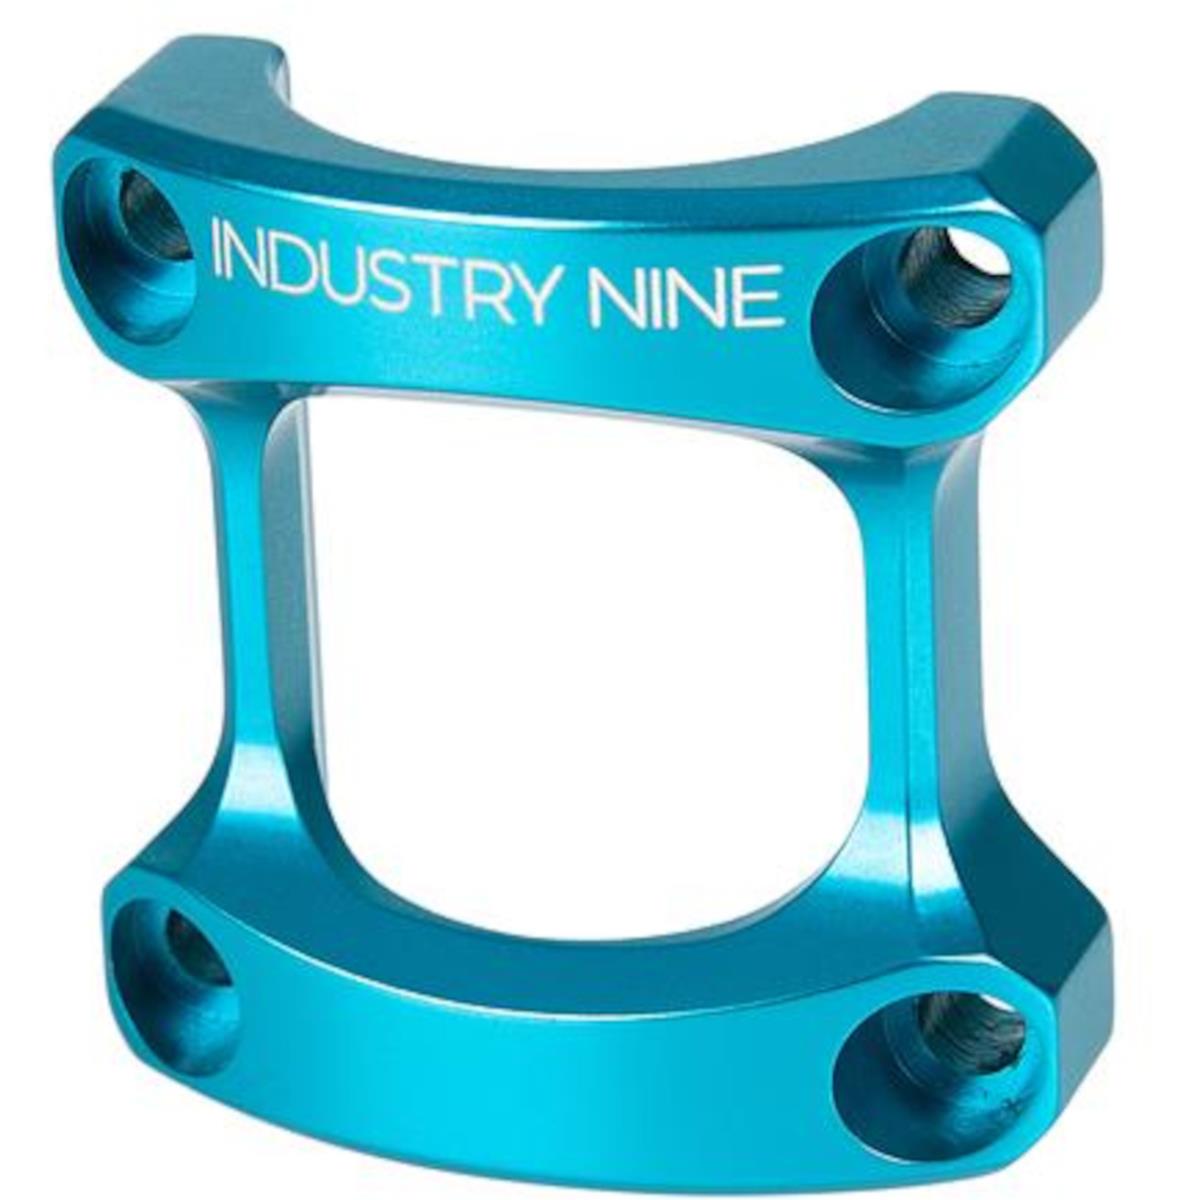 Industry Nine Stem Faceplate  for A318 Stems, Turquoise